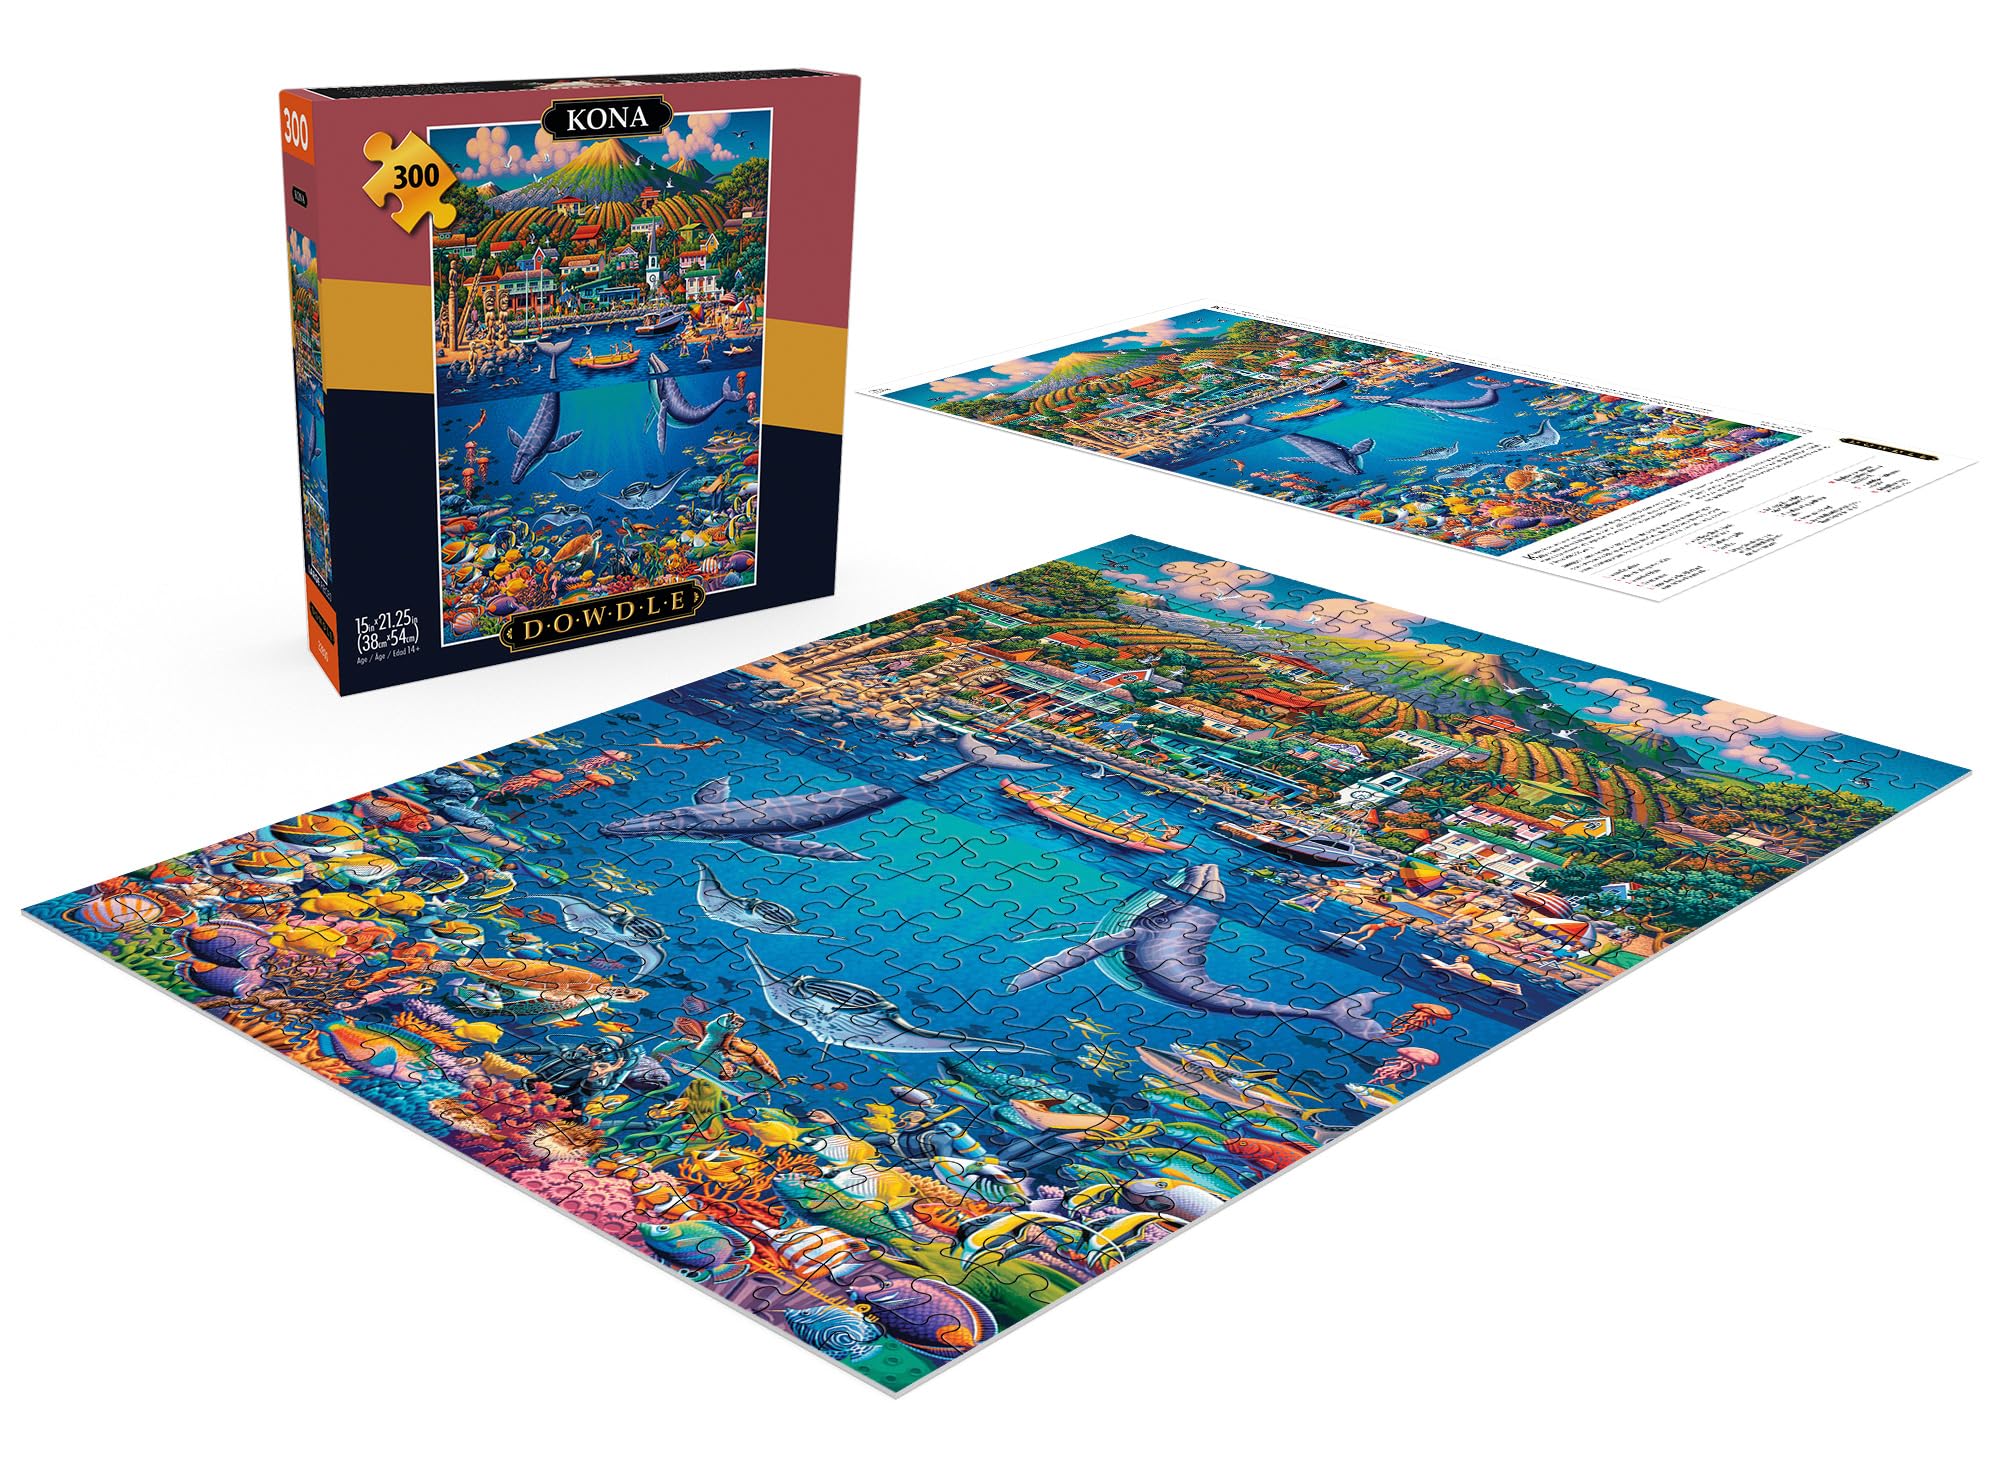 Buffalo Games - Dowdle - Kona - 300 Large Piece Jigsaw Puzzle for Adults Challenging Puzzle Perfect for Game Nights - Finished Size 21.25 x 15.00